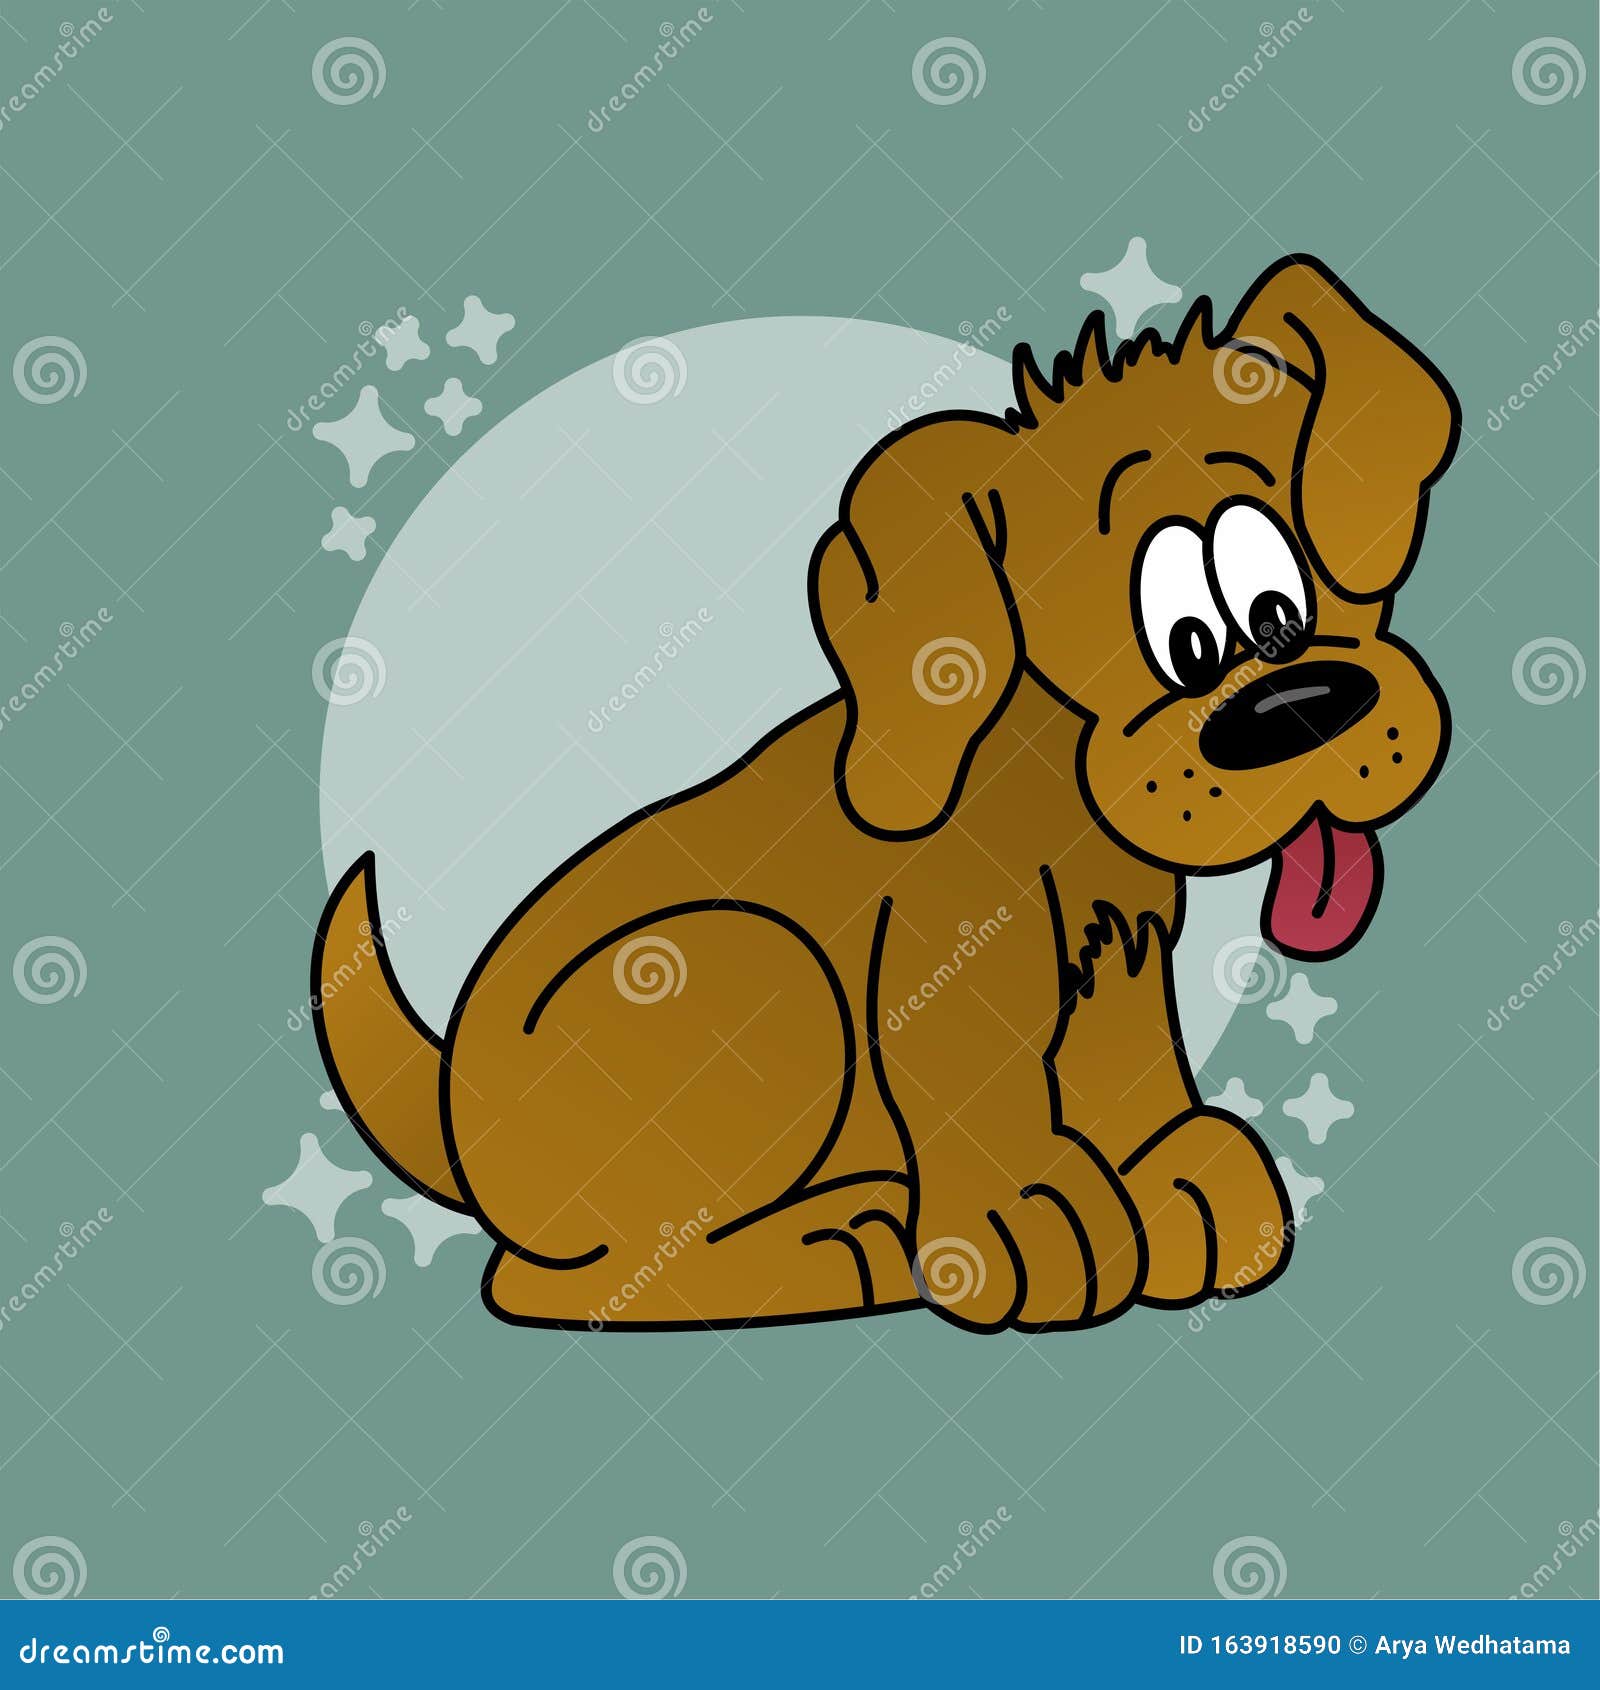 Illustration of Dog Sticking Out the Tongue Cartoon, Cute Funny Character,  Flat Design Stock Illustration - Illustration of amazing, life: 163918590